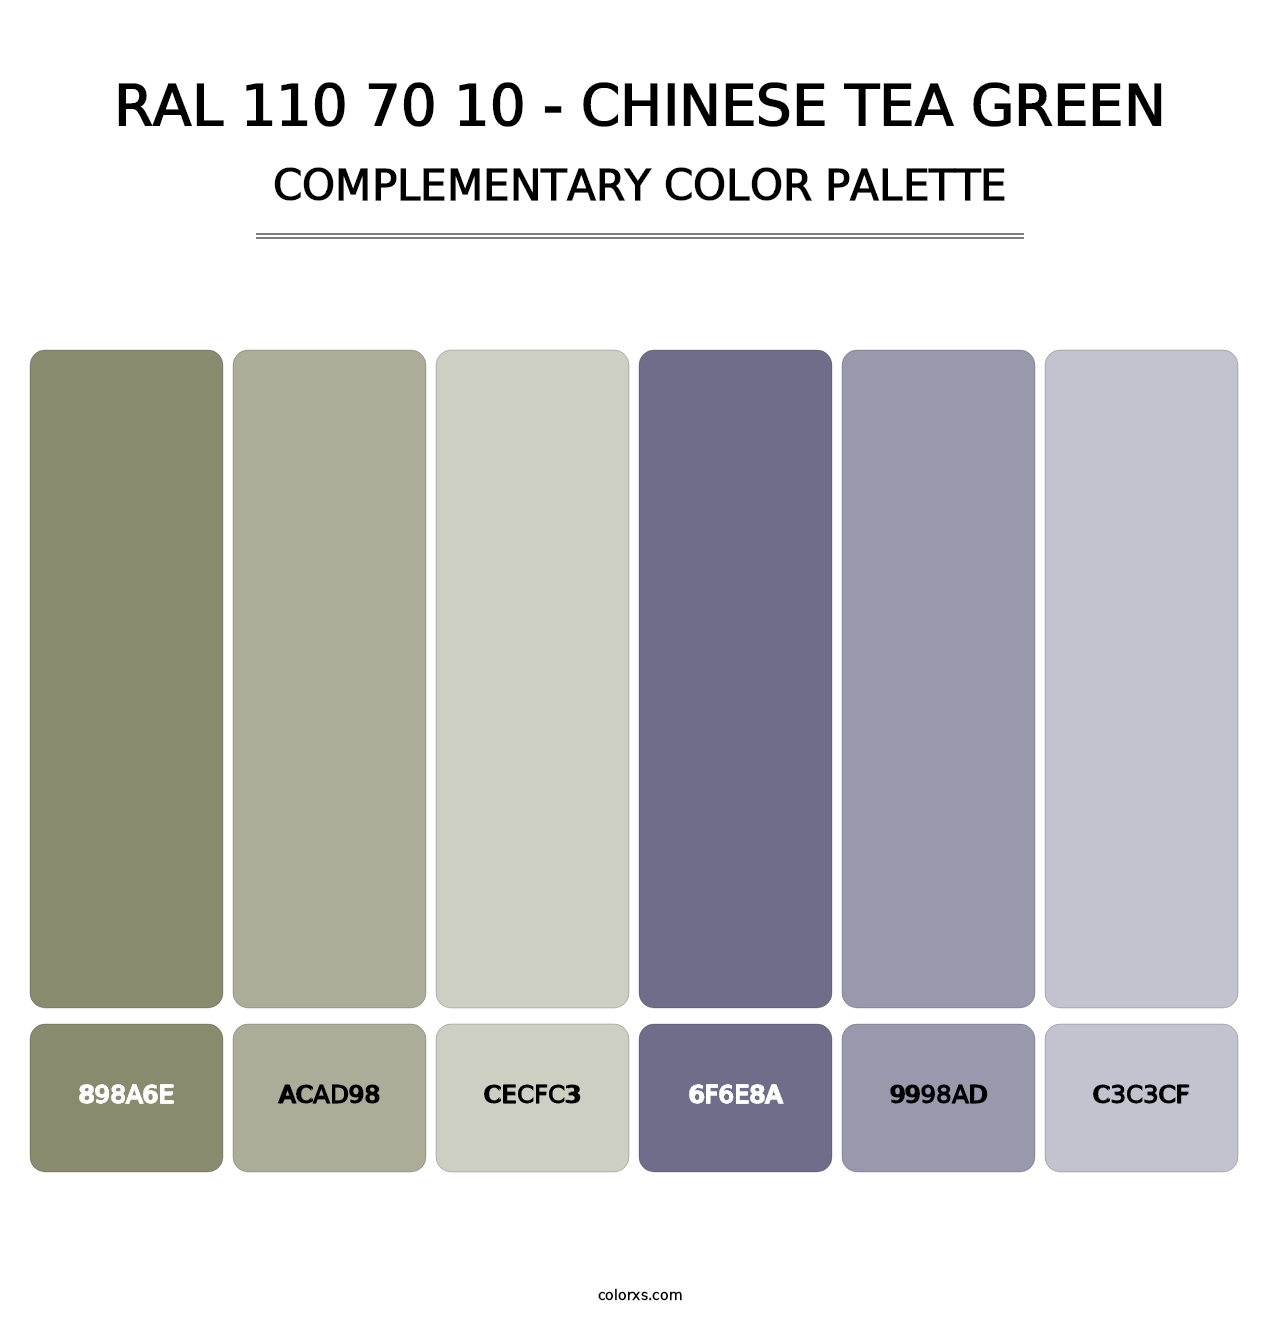 RAL 110 70 10 - Chinese Tea Green - Complementary Color Palette